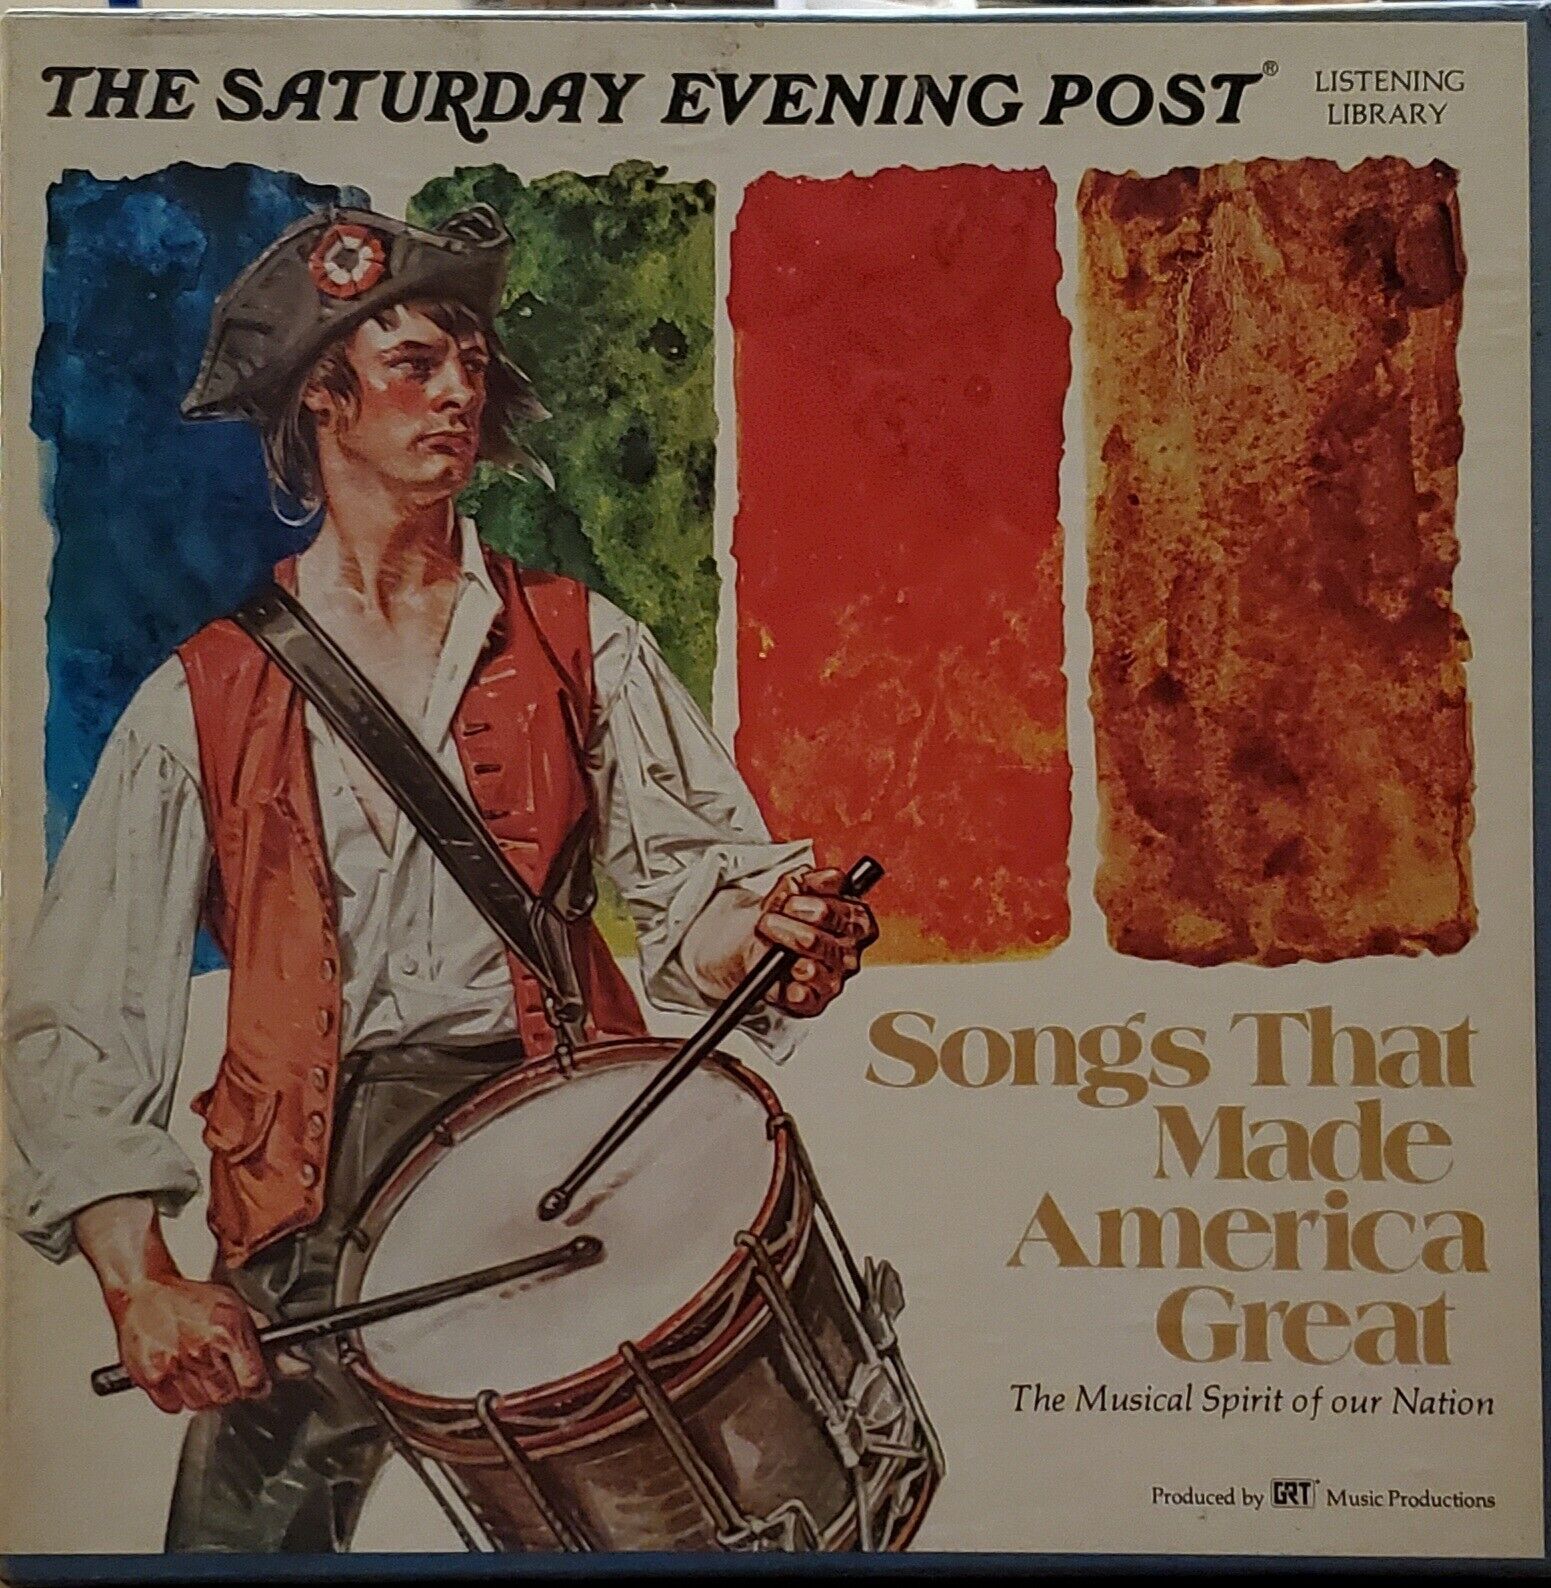 The Saturday Evening Post Listening Library: Songs That Made America Great 1975